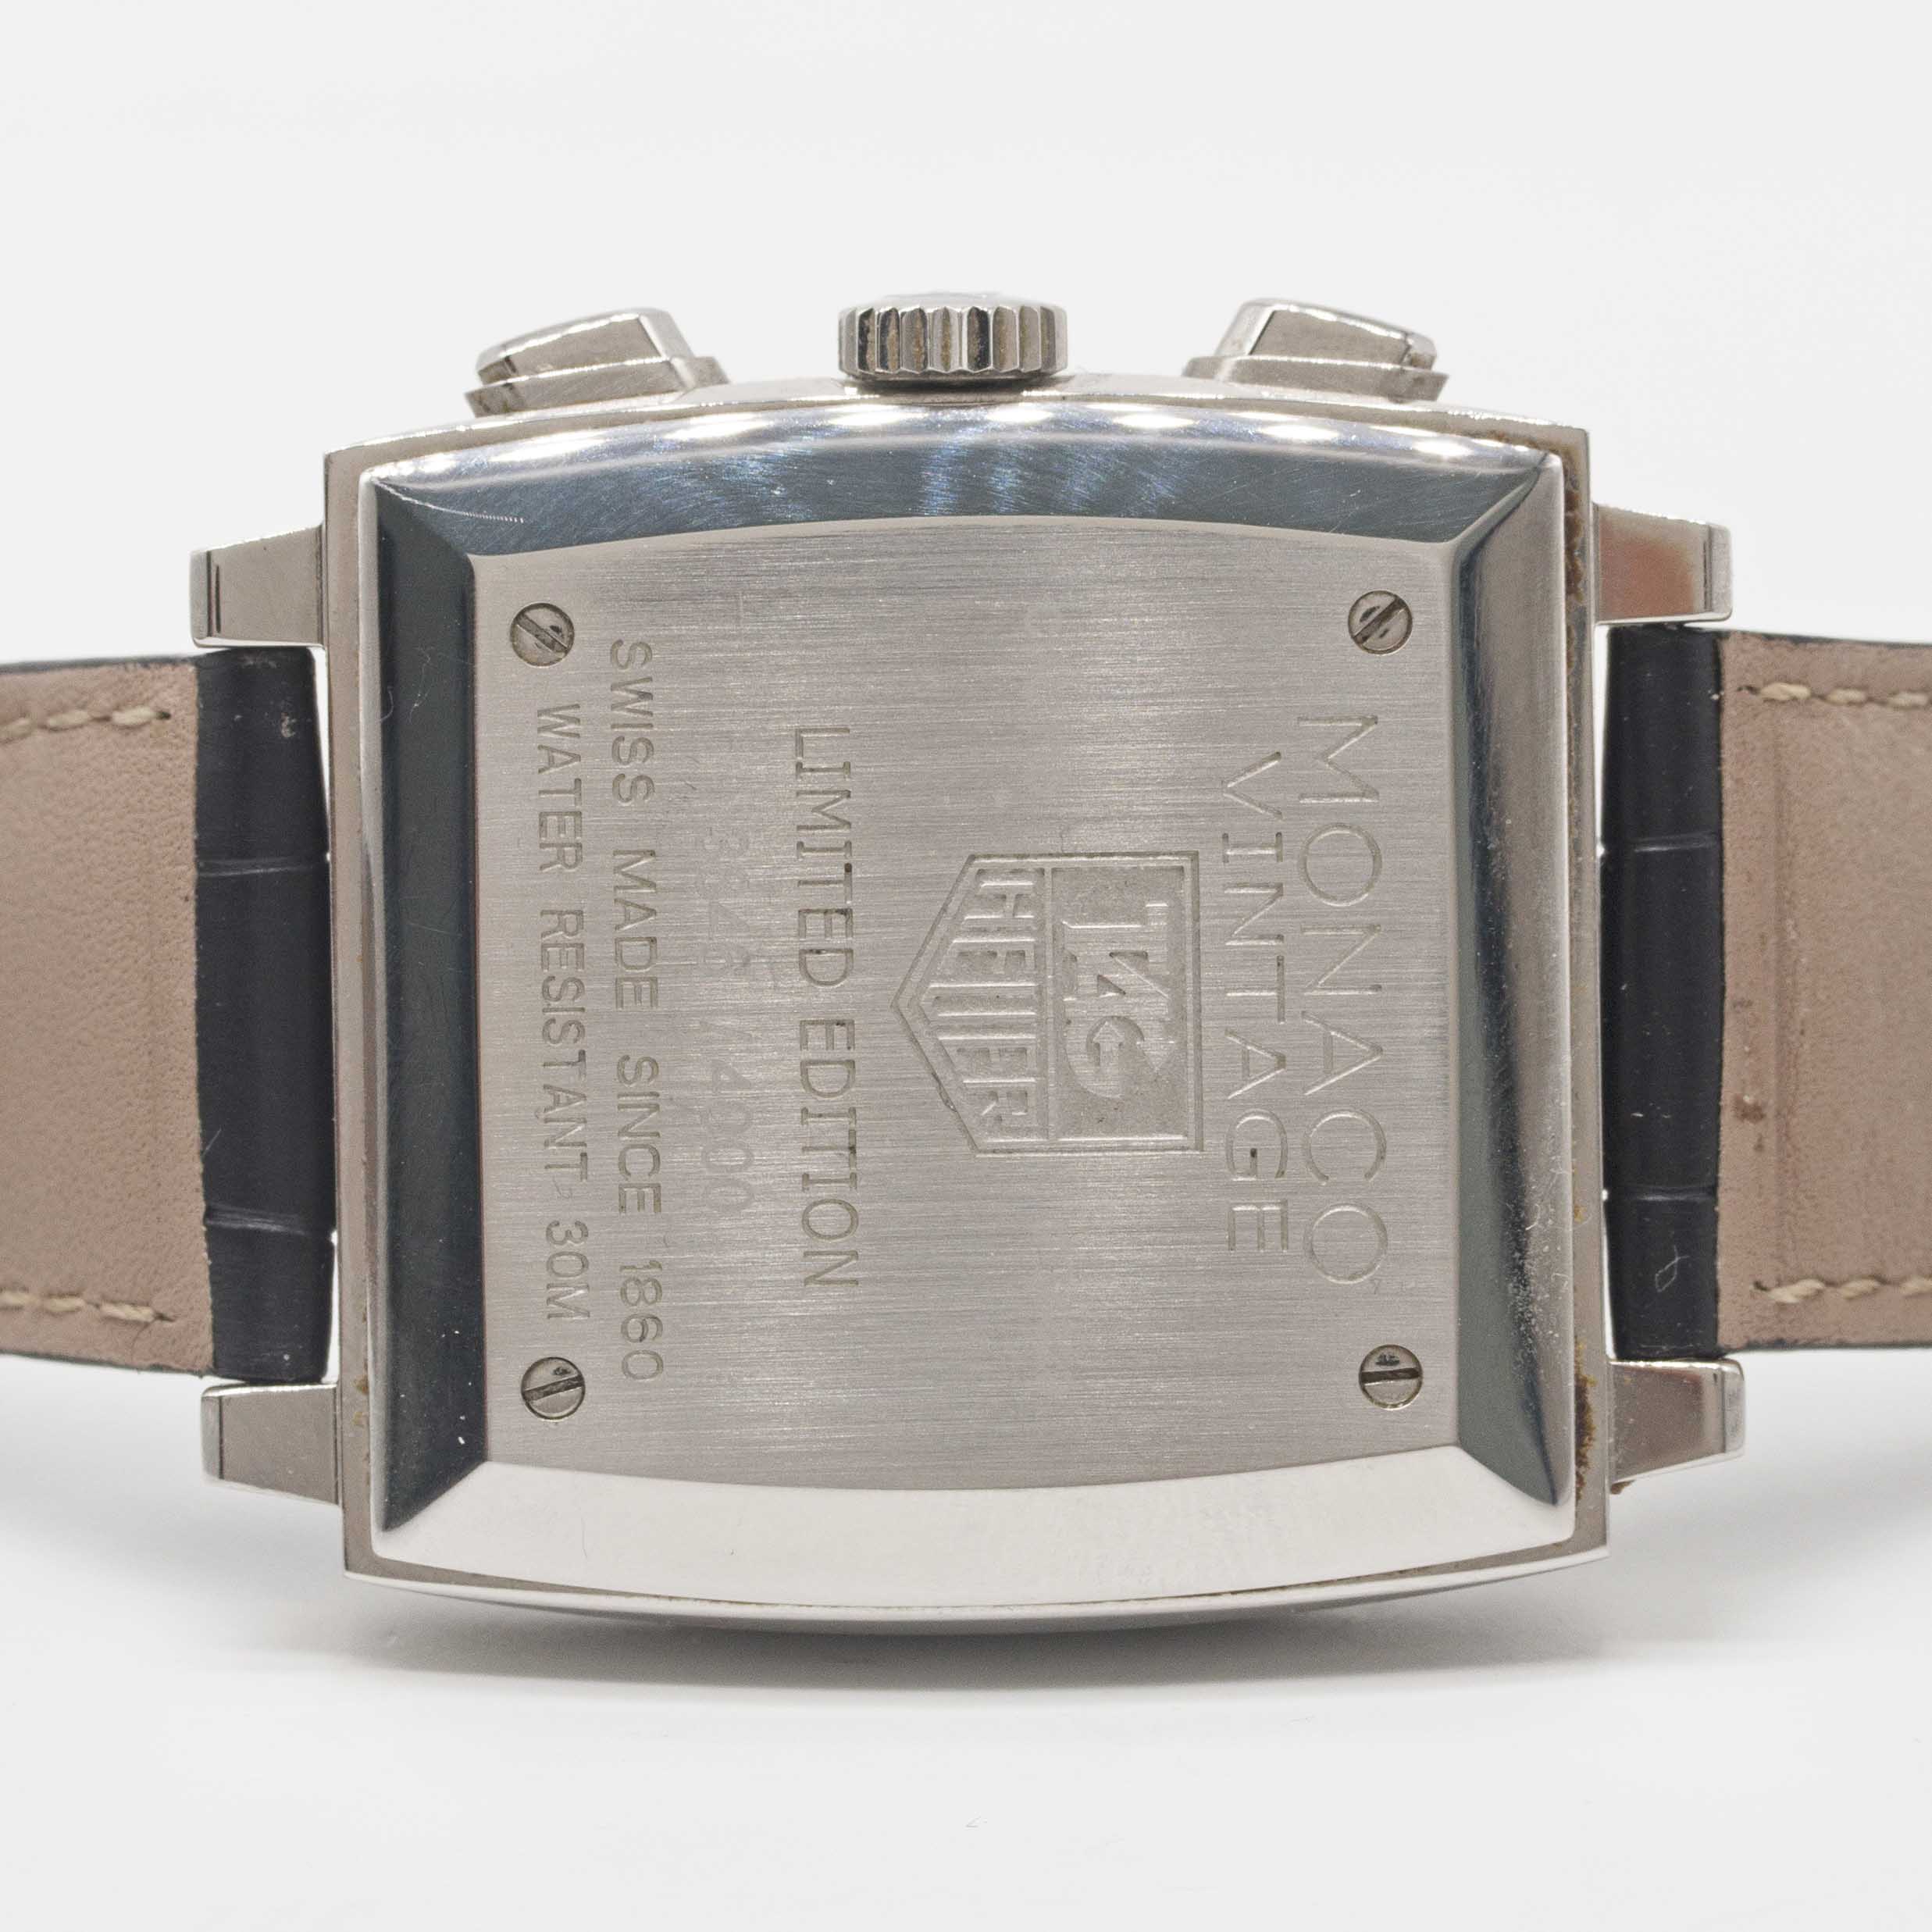 A GENTLEMAN'S STAINLESS STEEL TAG HEUER MONACO AUTOMATIC CHRONOGRAPH WRIST WATCH CIRCA 2008, REF. - Image 6 of 6